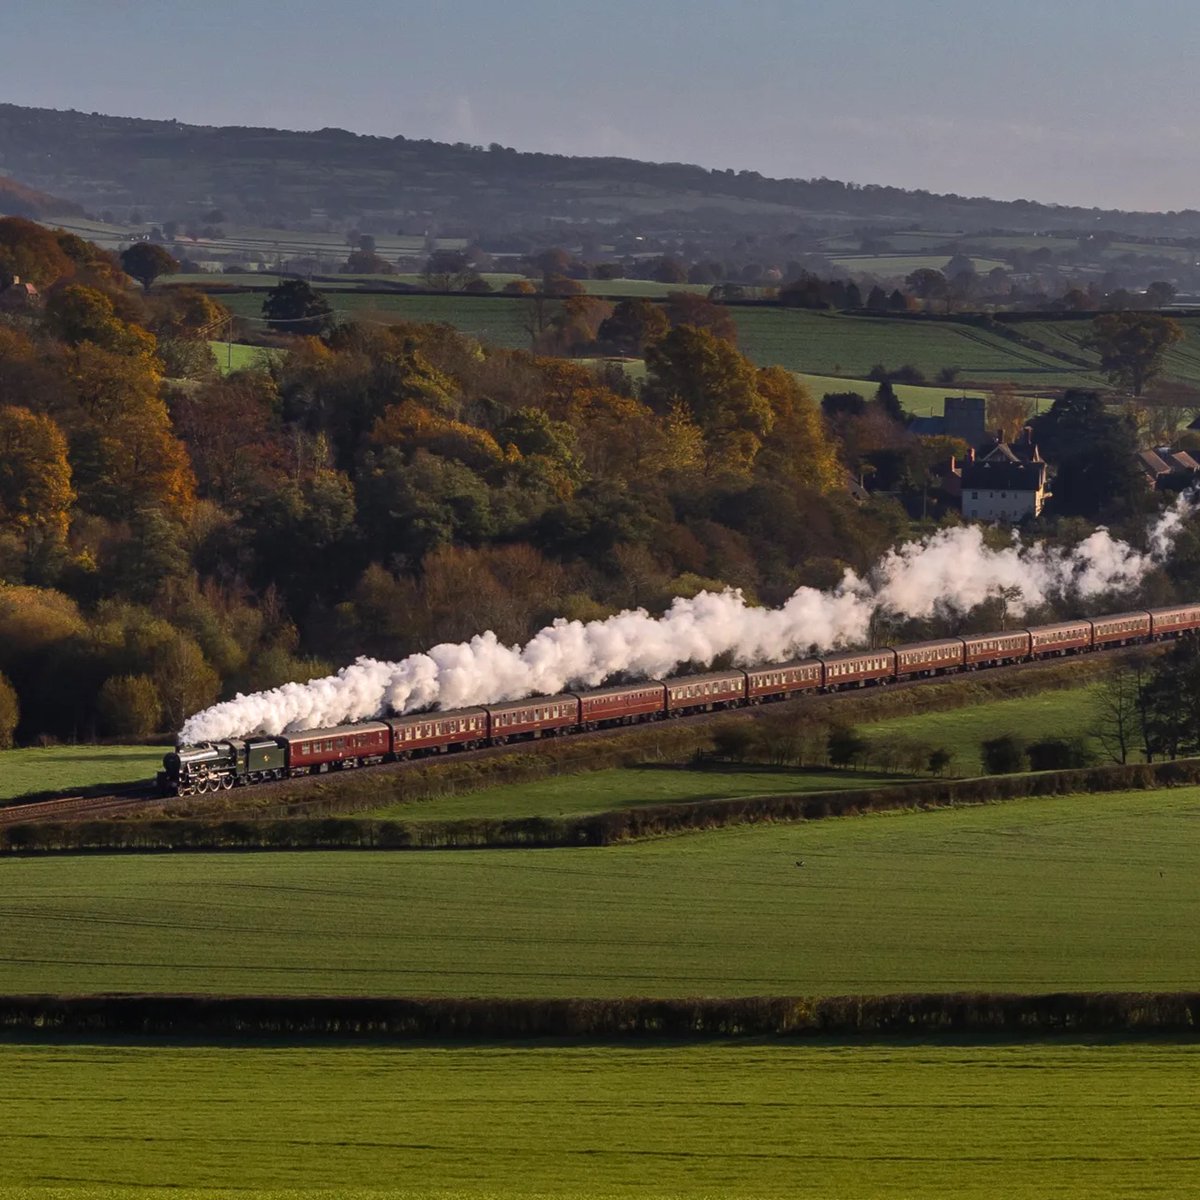 The Pembroke Coast Express 19th May 2024 🏖️ Travel over the scenic branch line to Pembroke Dock. This train recalls the 1950s days of named steam trains on the former Western Region of British Railways, running from London Paddington through South Wales to the Pembroke Coast.